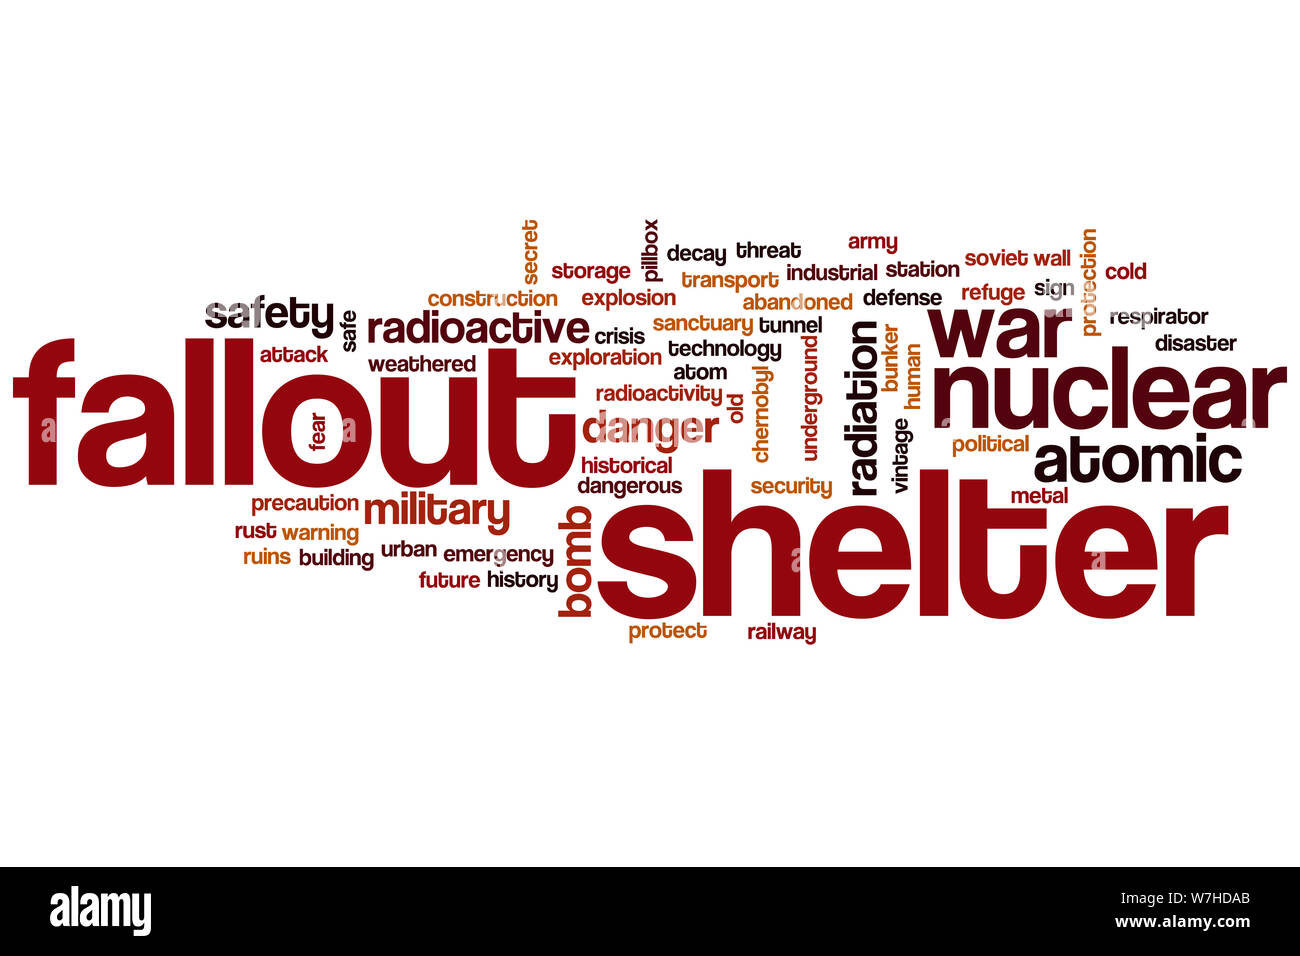 Fallout shelter word cloud concept Stock Photo